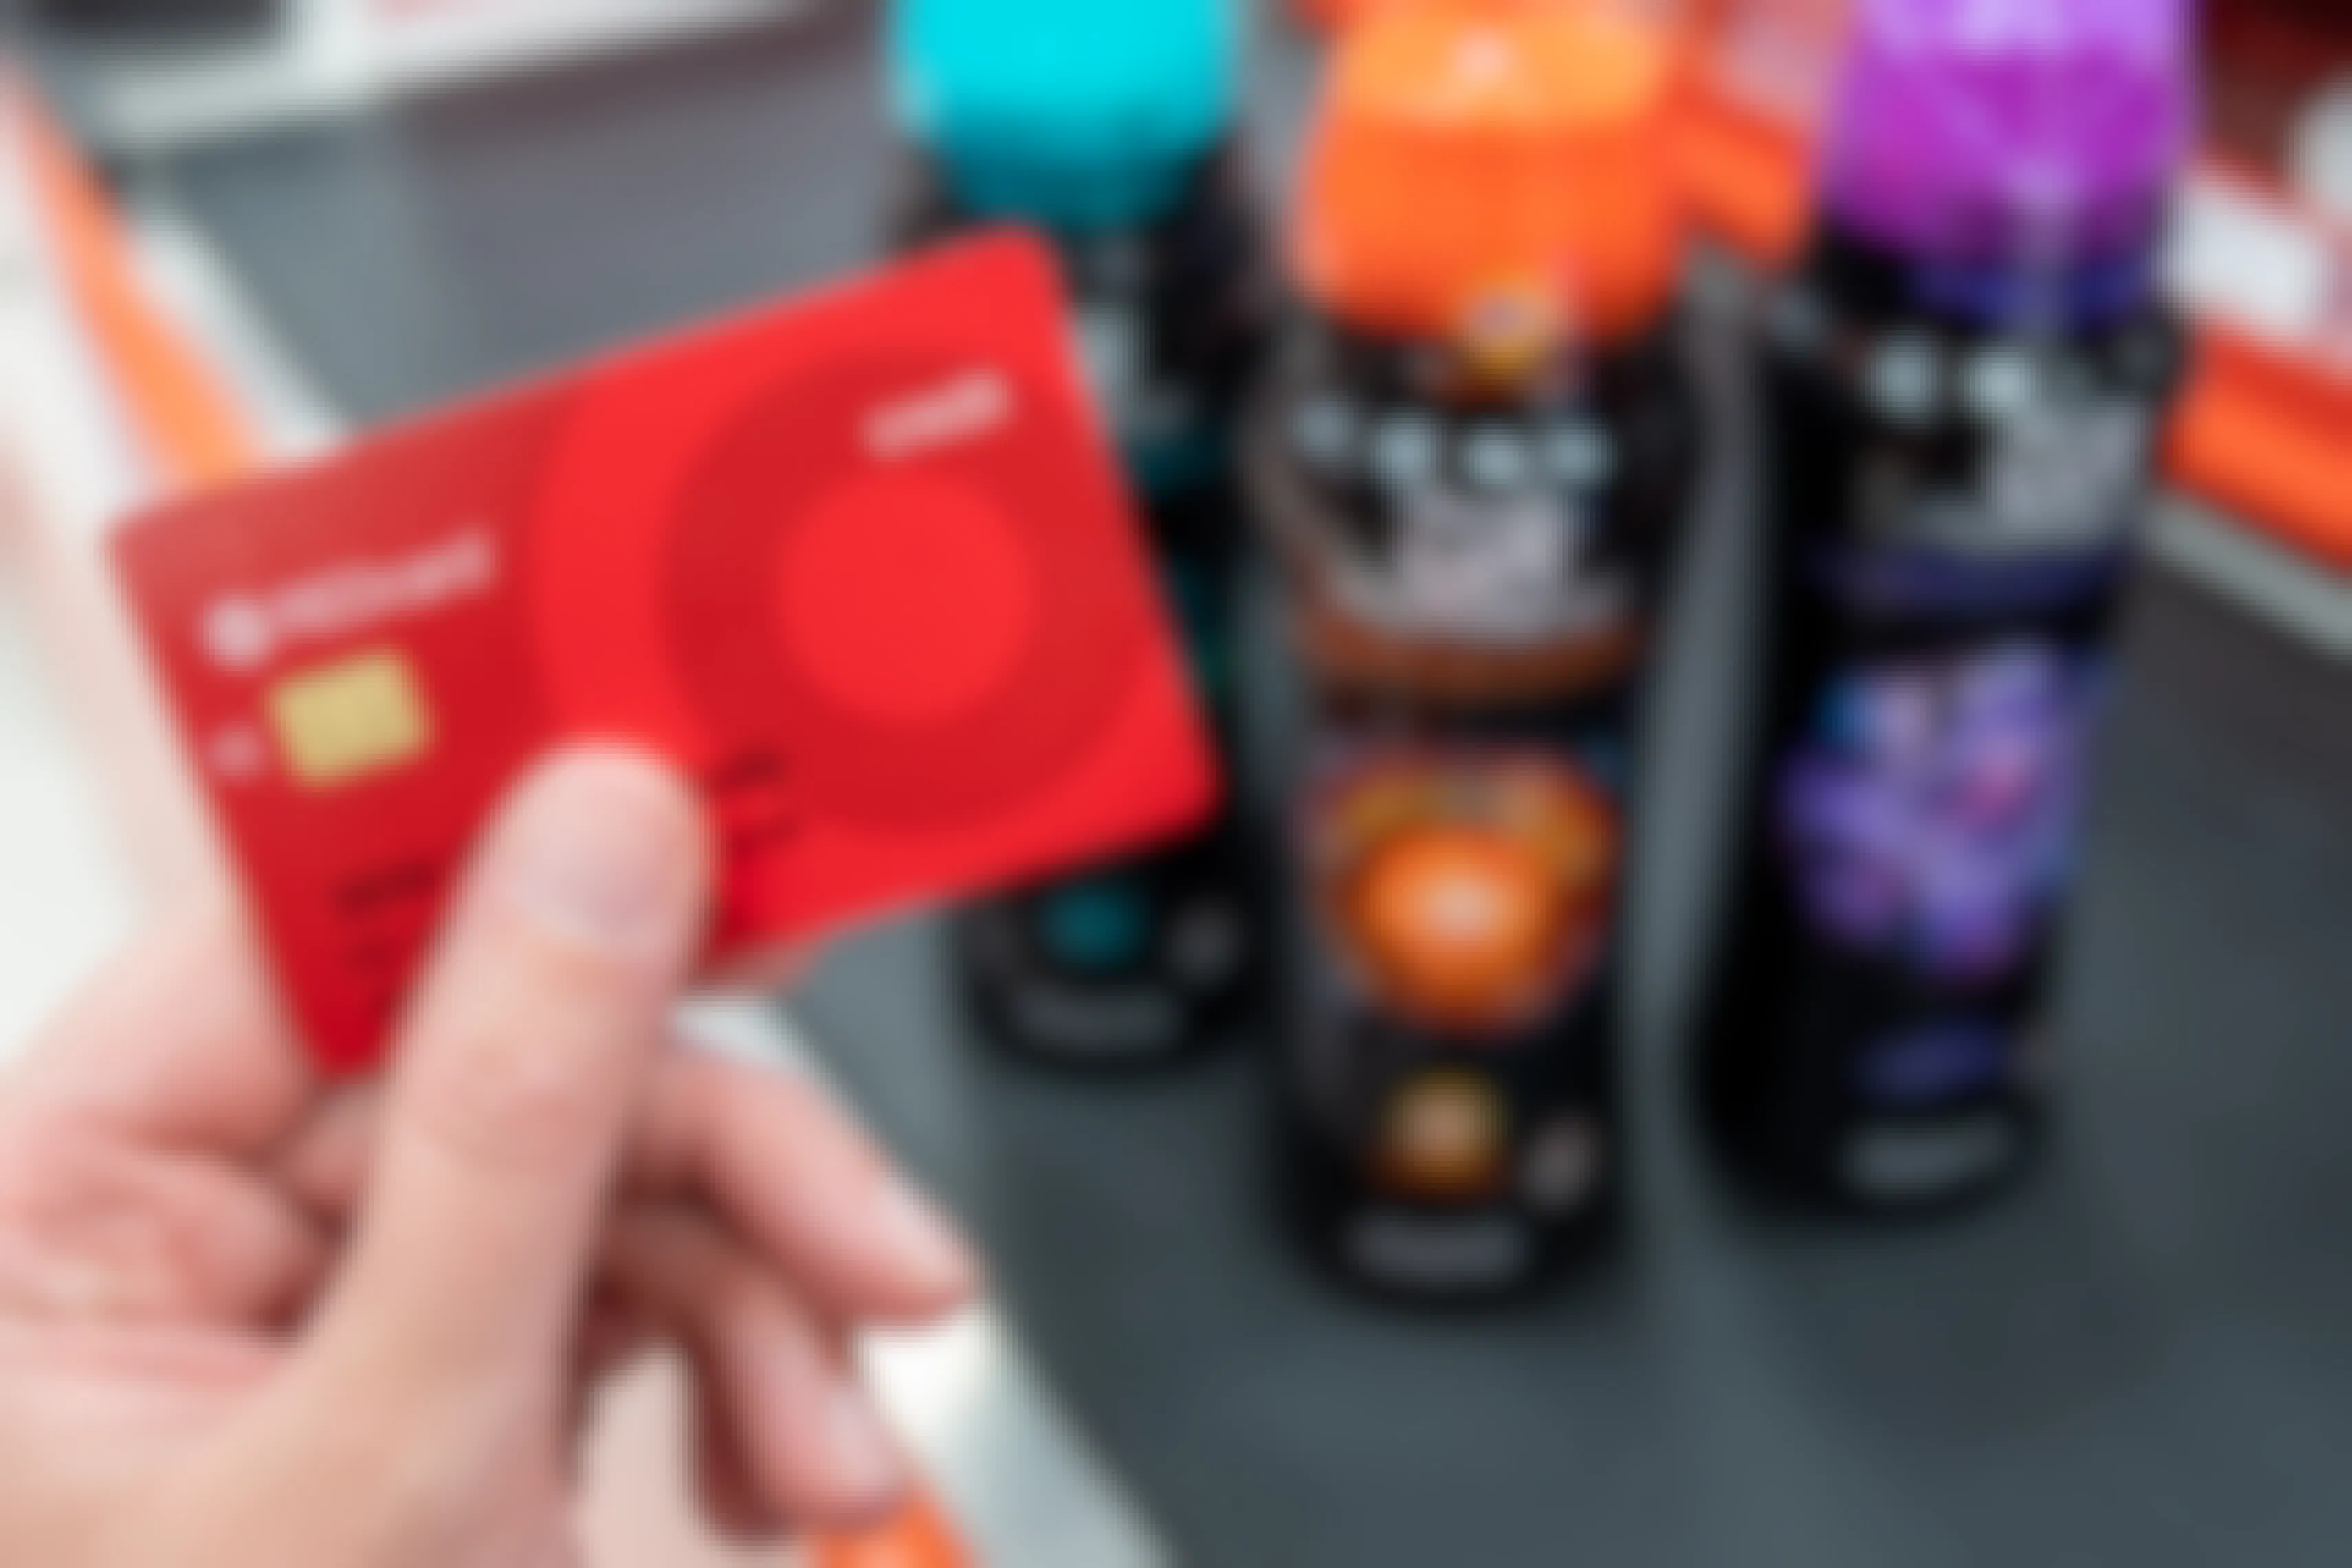 A Target red card held in front of Downy Unstopables bottles at a checkout register.